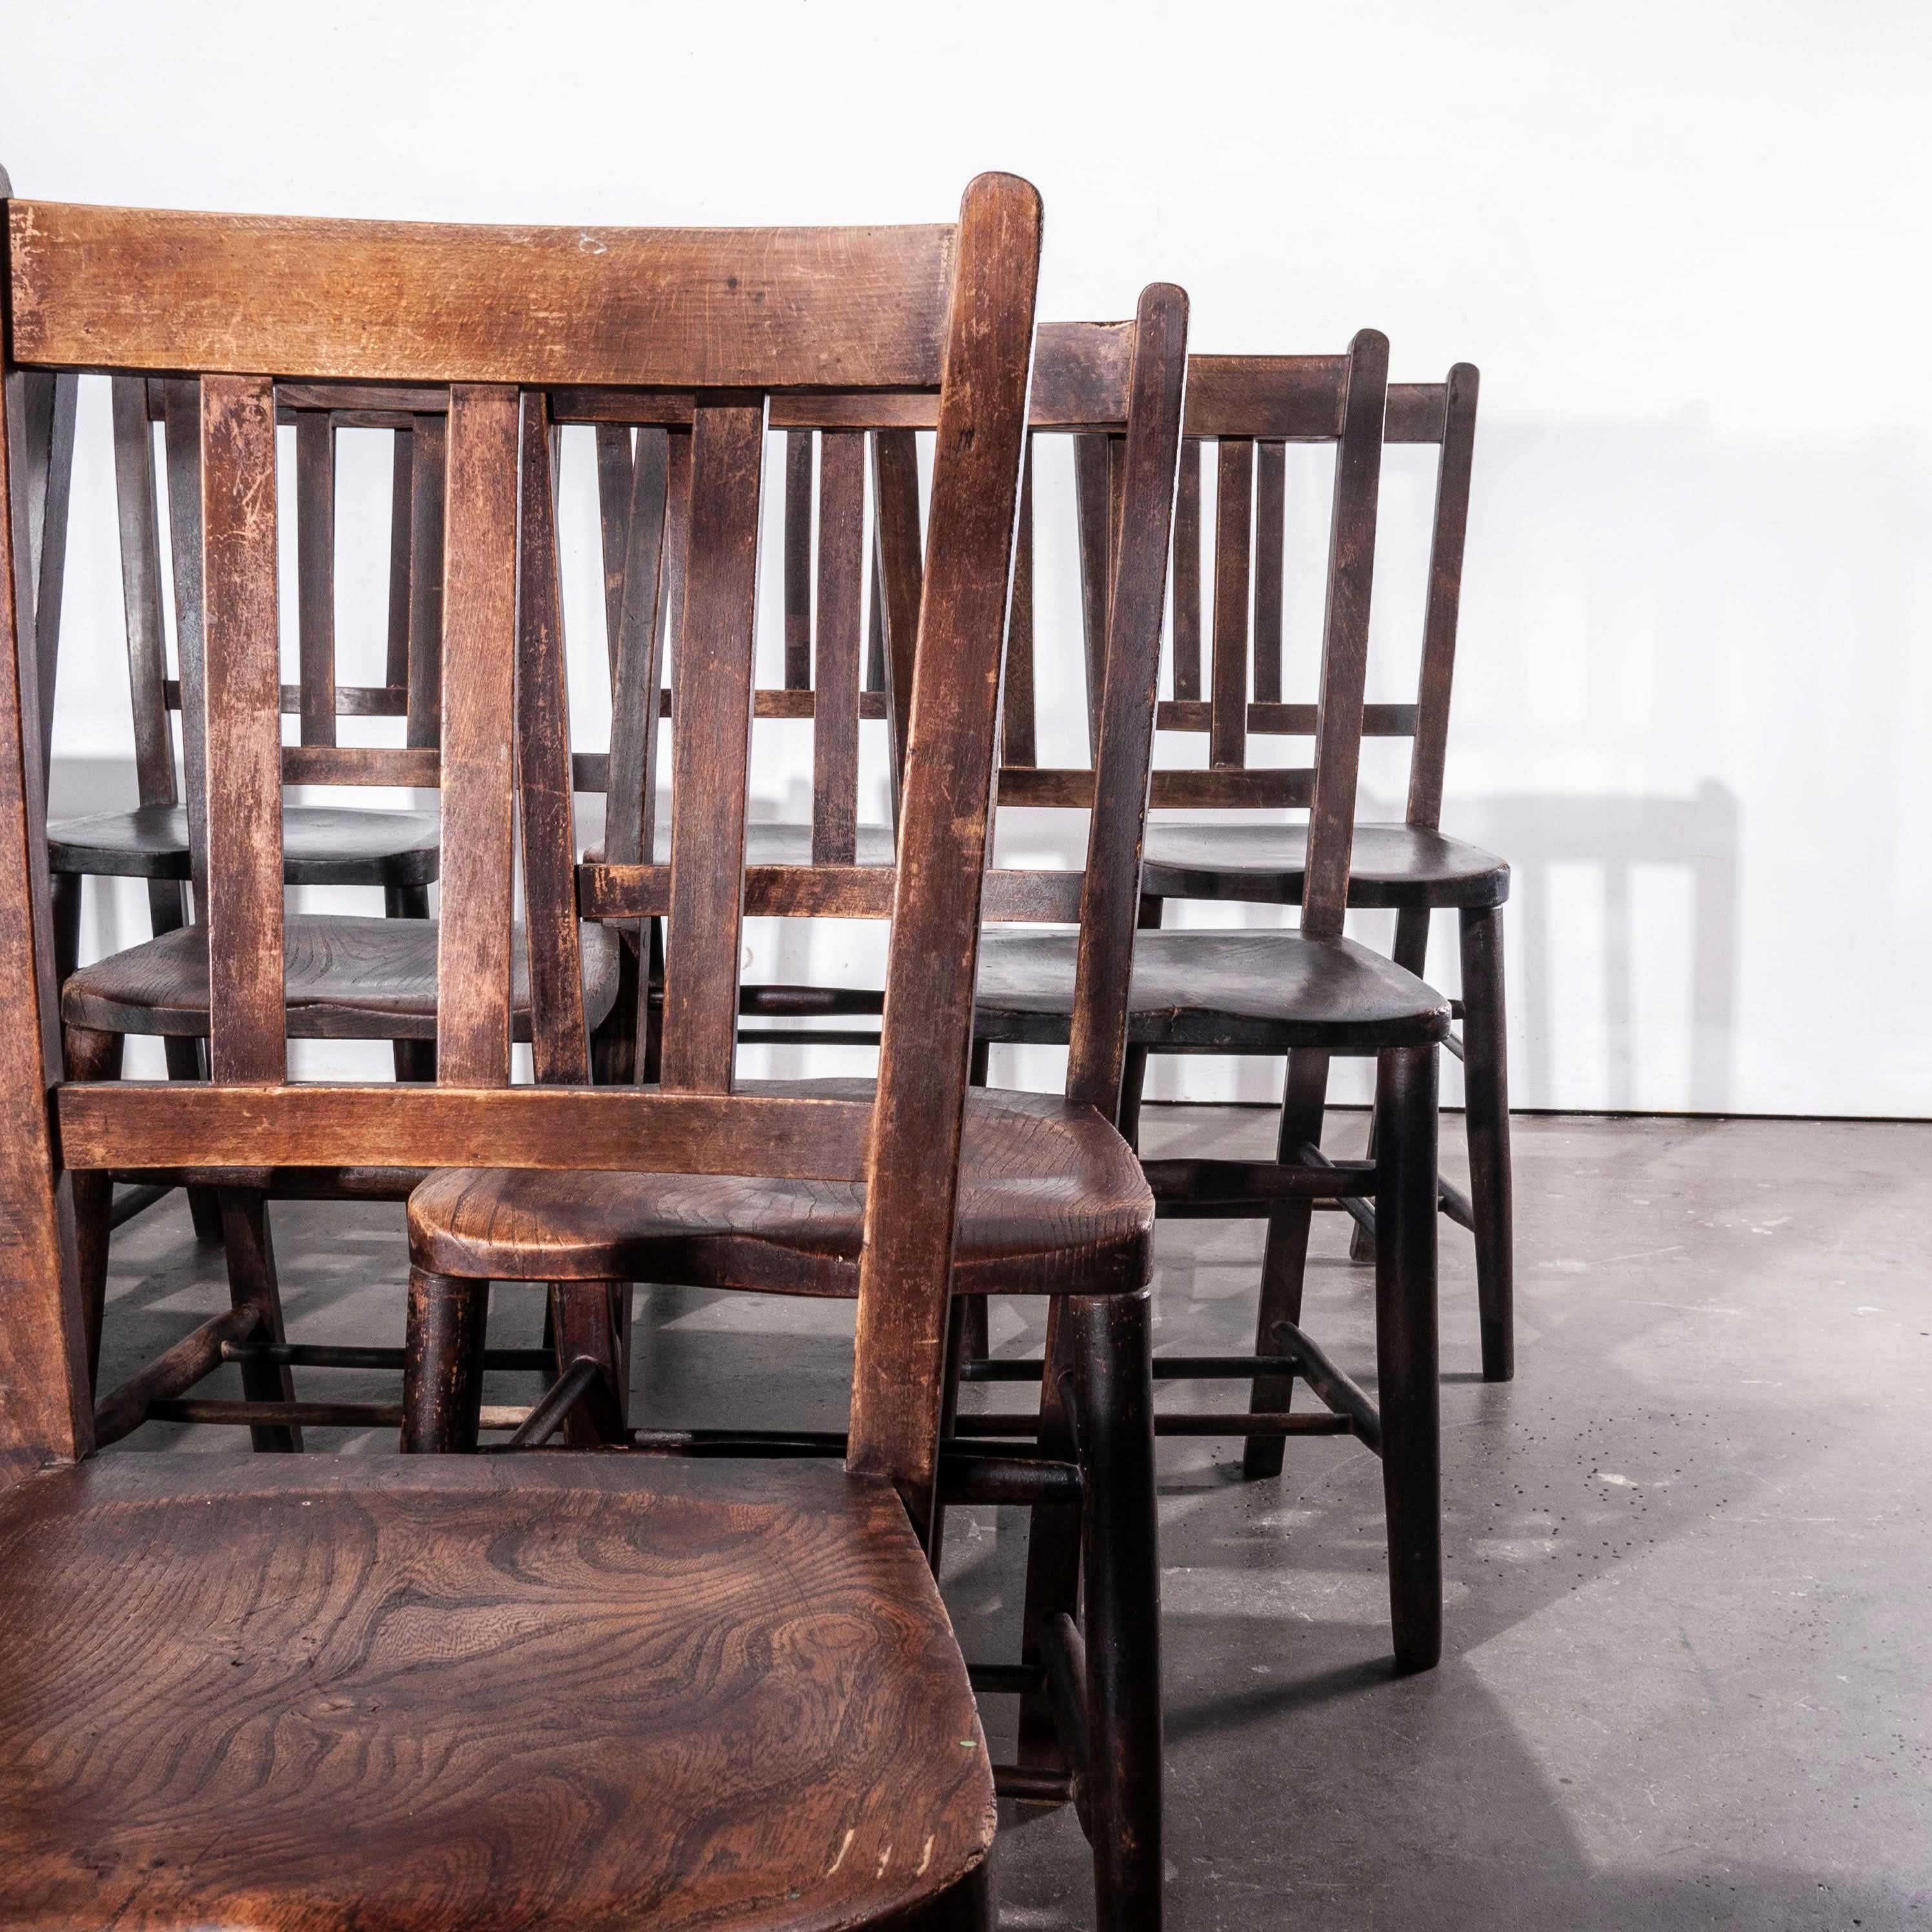 1920s dark elm church, chairs, set of twelve

1920s dark elm church, chairs, set of twelve. England has a wonderfully rich heritage for making chairs. At the height of production at the turn of the last century over 4500 chairs were being produced